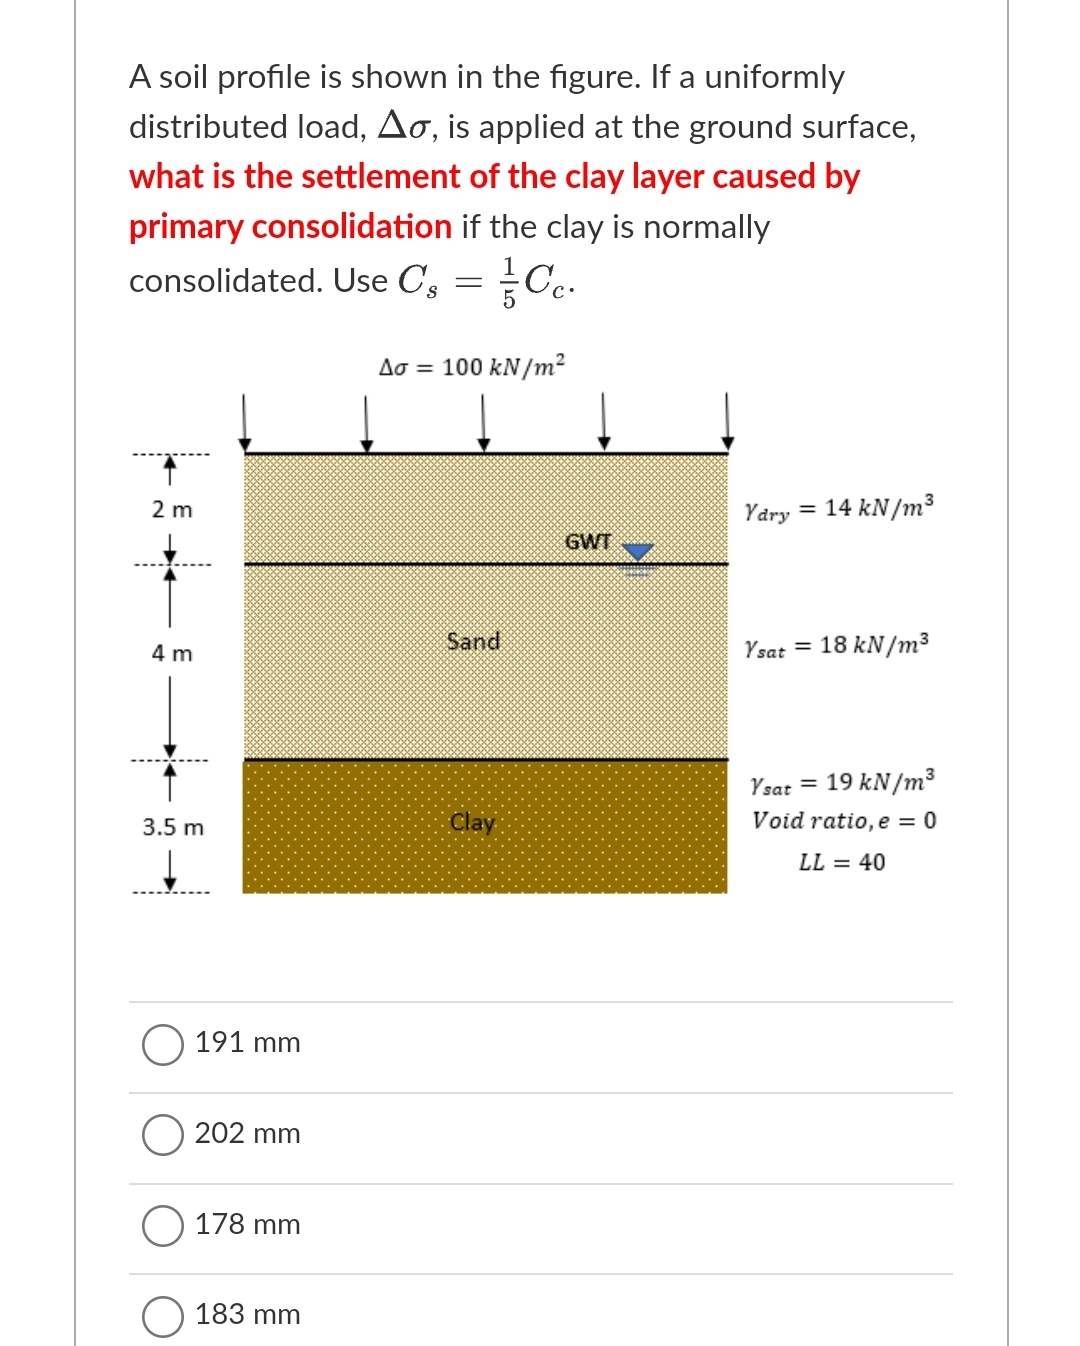 A soil profile is shown in the figure. If a uniformly
distributed load, Ao, is applied at the ground surface,
what is the settlement of the clay layer caused by
primary consolidation if the clay is normally
consolidated. Use C, = Cc.
Ao = 100 kN/m?
2 m
Ydry
= 14 kN/m3
GWT
4 m
Sand
Ysat = 18 kN/m³
Ysat = 19 kN/m³
3.5 m
Clay
Void ratio, e = 0
LL = 40
191 mm
202 mm
178 mm
183 mm
